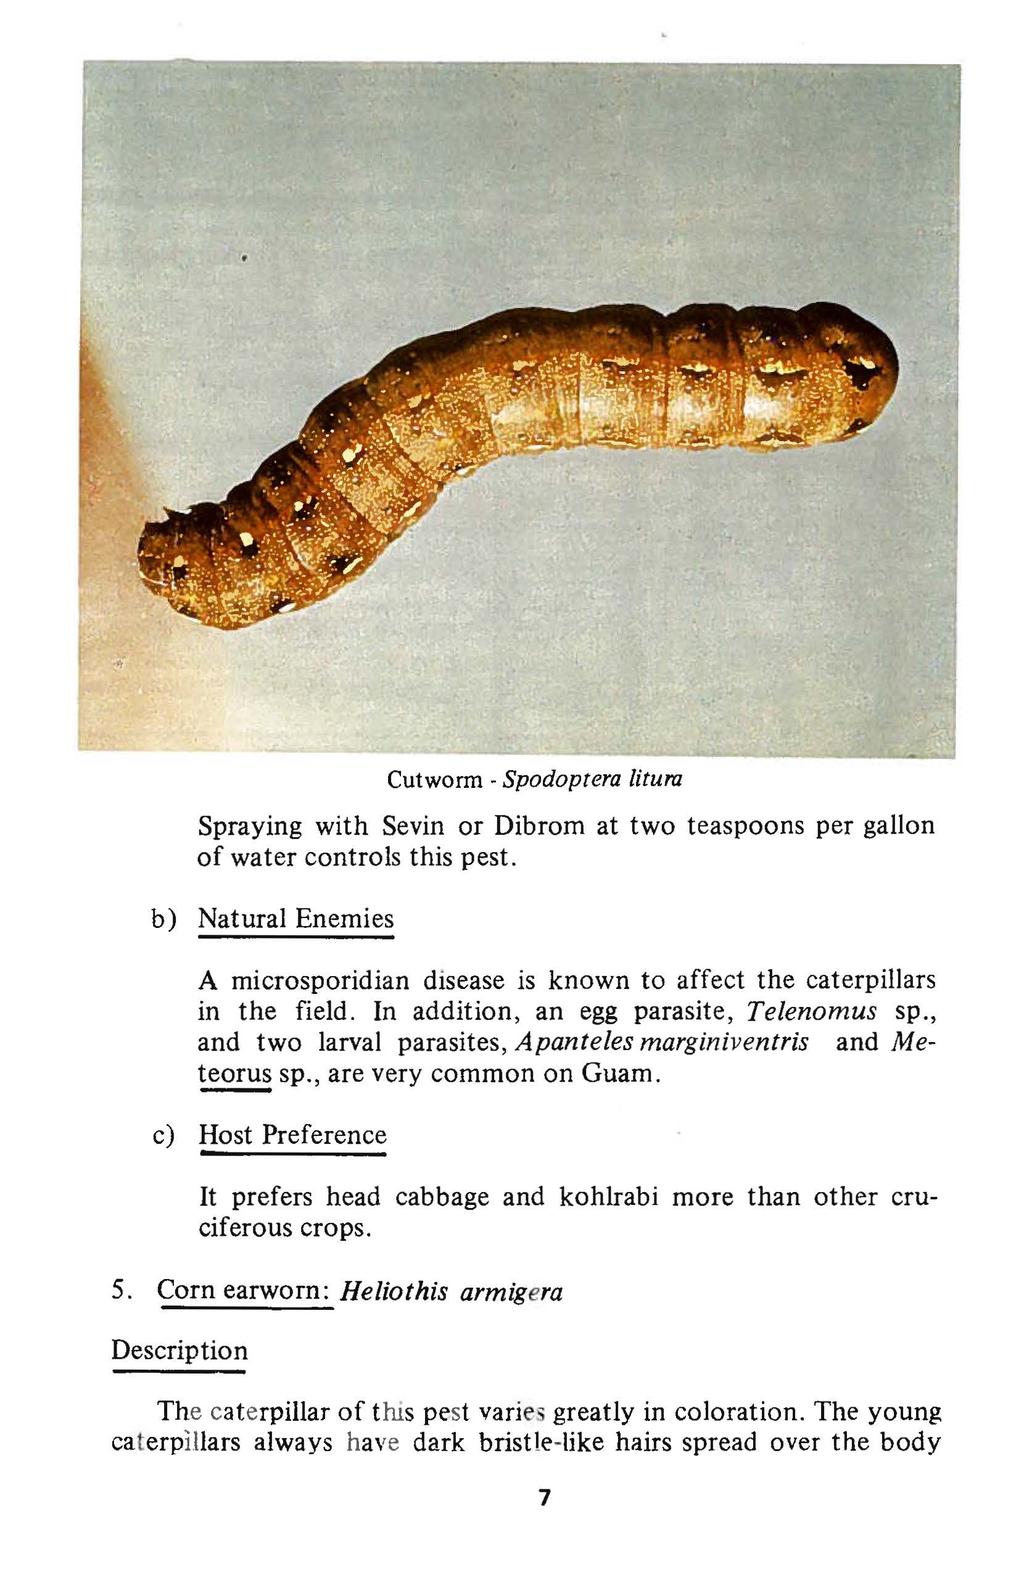 Cutworm - Spodoptera litura Spraying with Sevin or Dibrom at two teaspoons per gallon of water controls this pest.